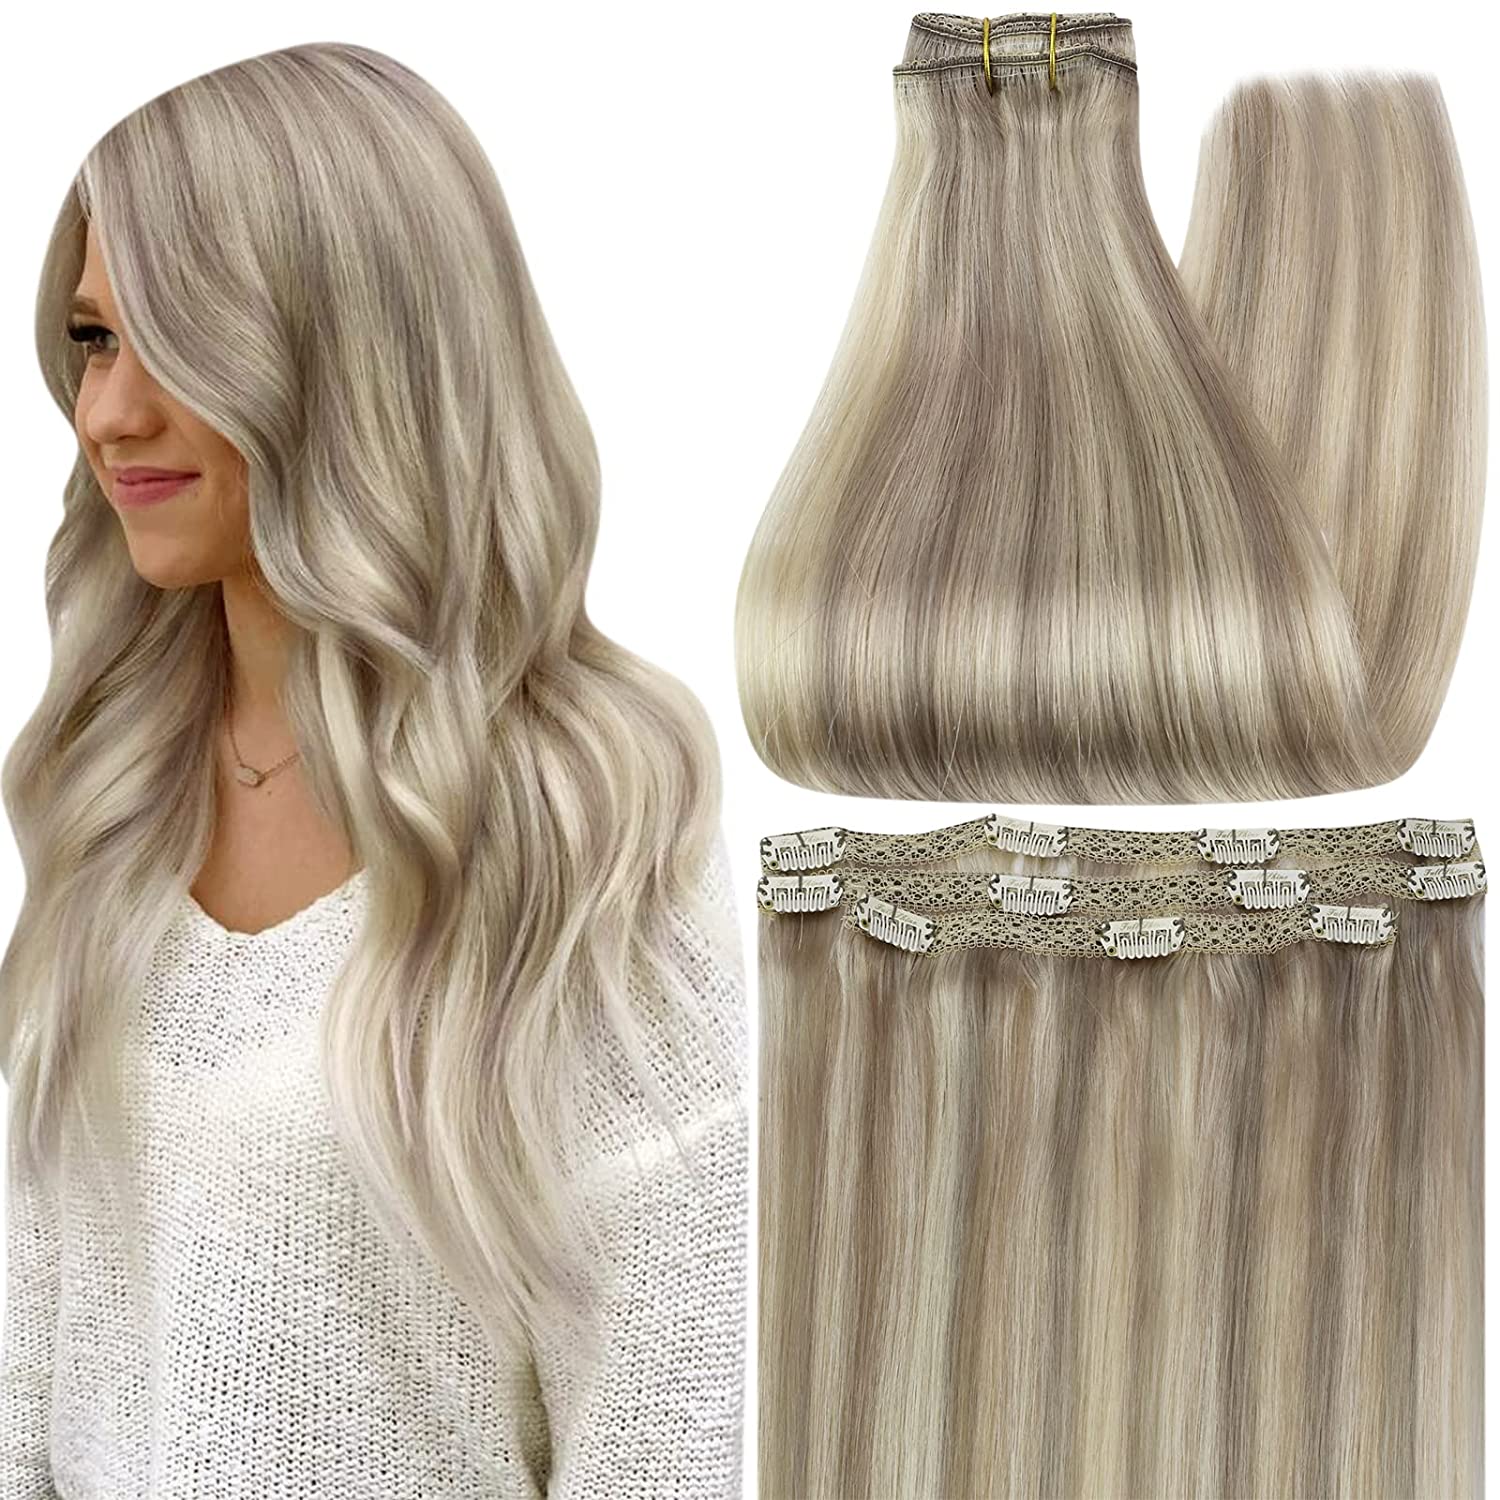 FShine Lace Clip In Hair Extensions Clip in Hair Extensions #GreyP60 - FShine Shop